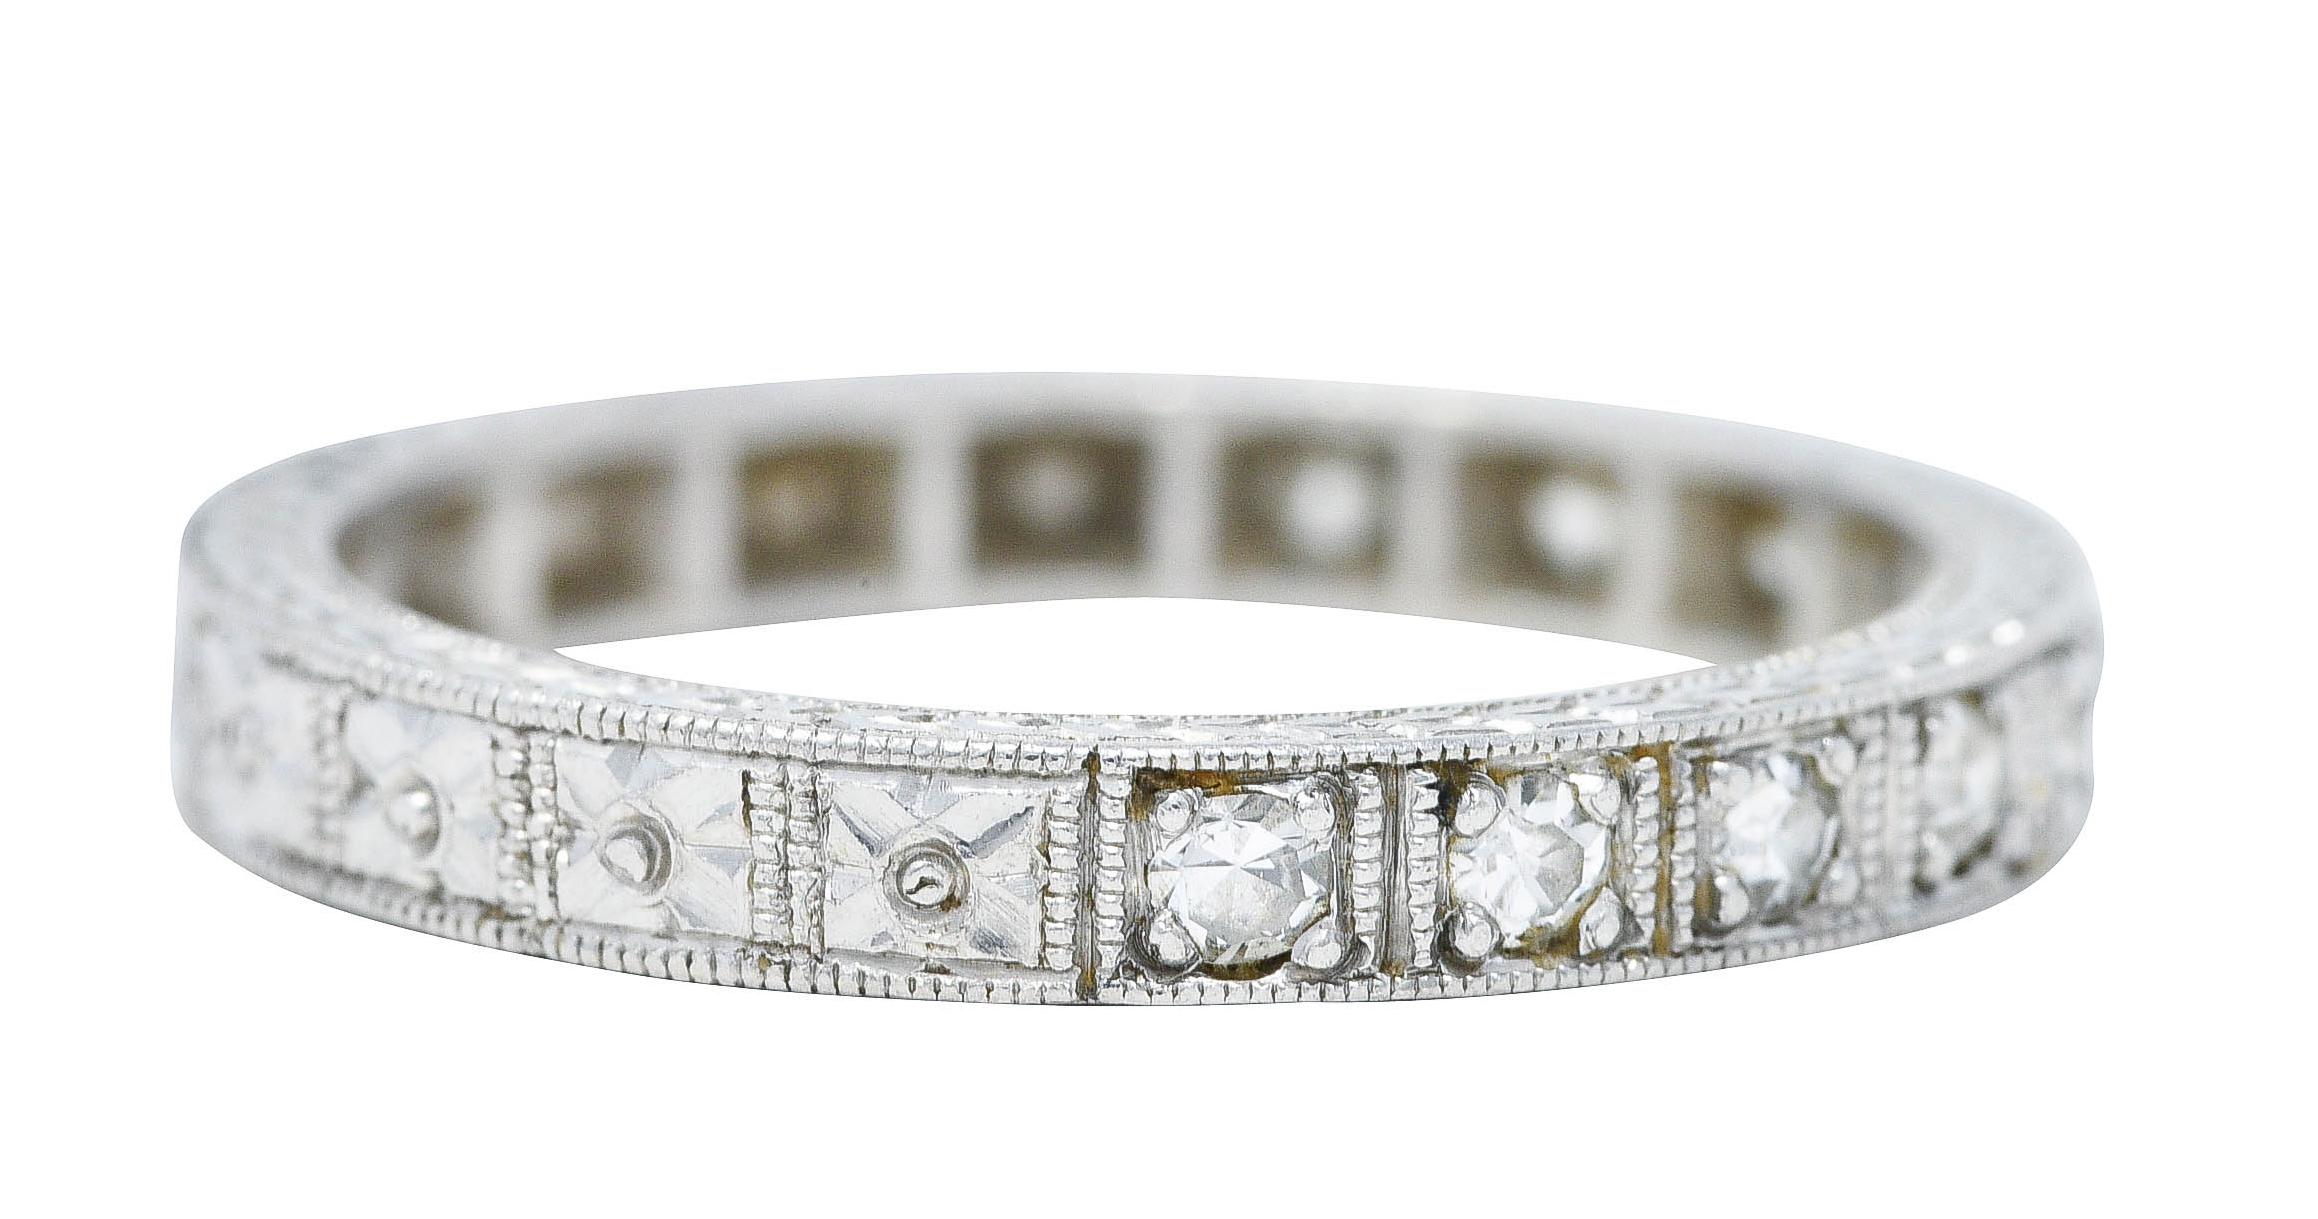 Band ring features single cut diamonds bead set to front with milgrain surround

Weighing approximately 0.25 carat total - eye clean and bright

Accented by engraved orange blossom motif shank

With engraved wheat motif profile

Tested as